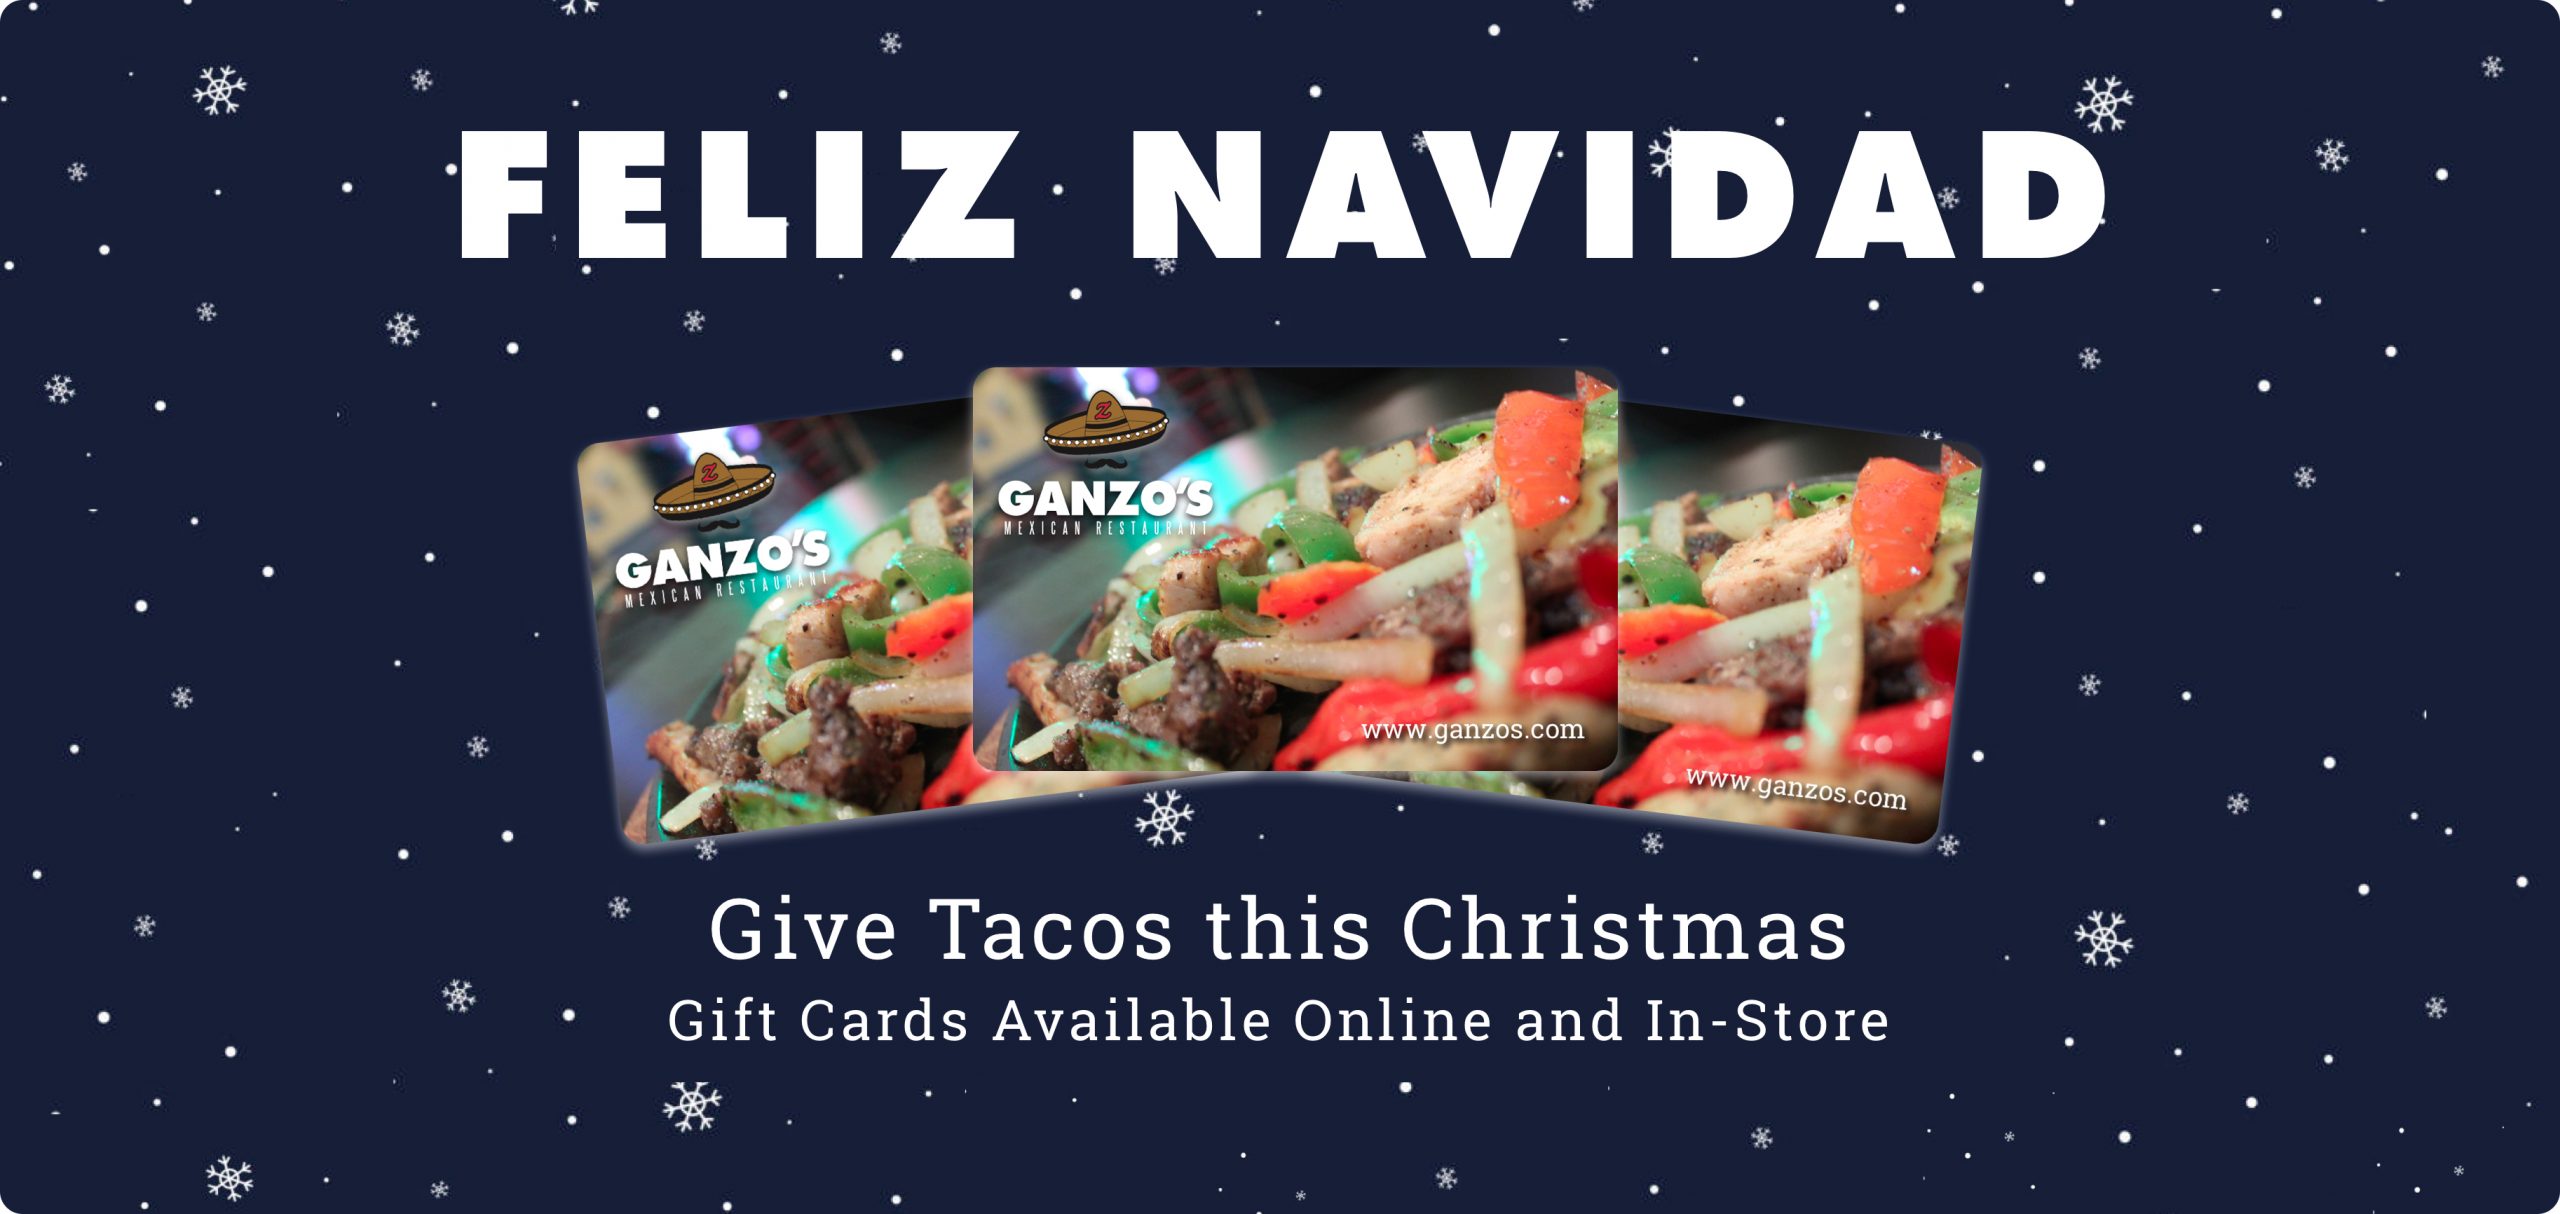 Ganzo's gift cards make the perfect Christmas gift! Order online or stop in today to purchase yours.